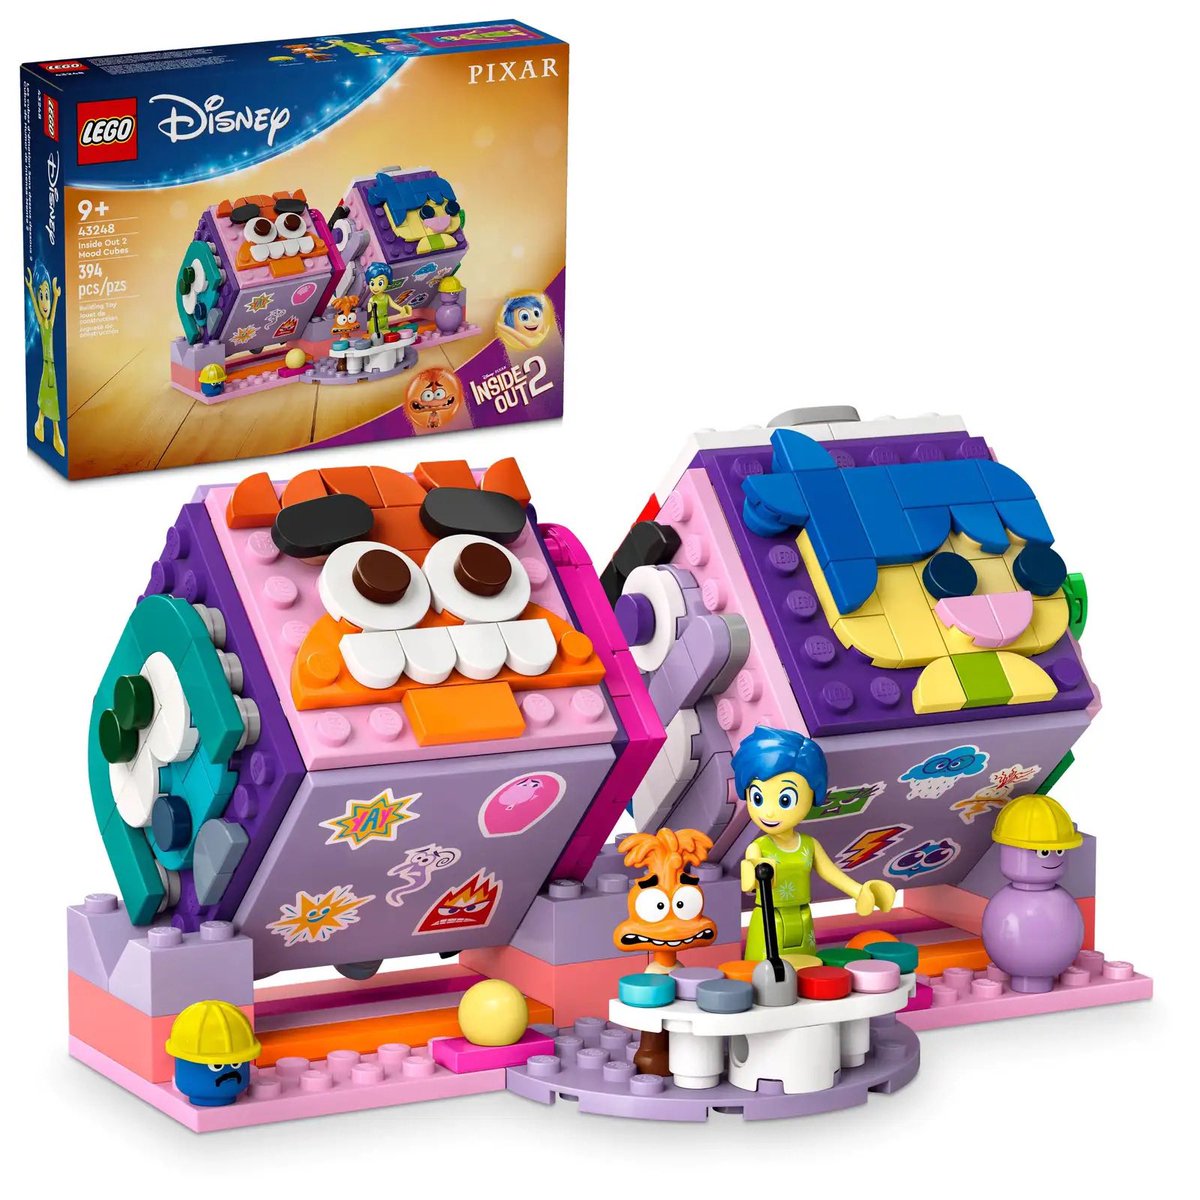 Available Now: Lego Inside Out 2 set at the Lego Store!
#Ad #Lego #Disney #Pixar #InsideOut #Collectibles
.
distracker.info/4dj75FK